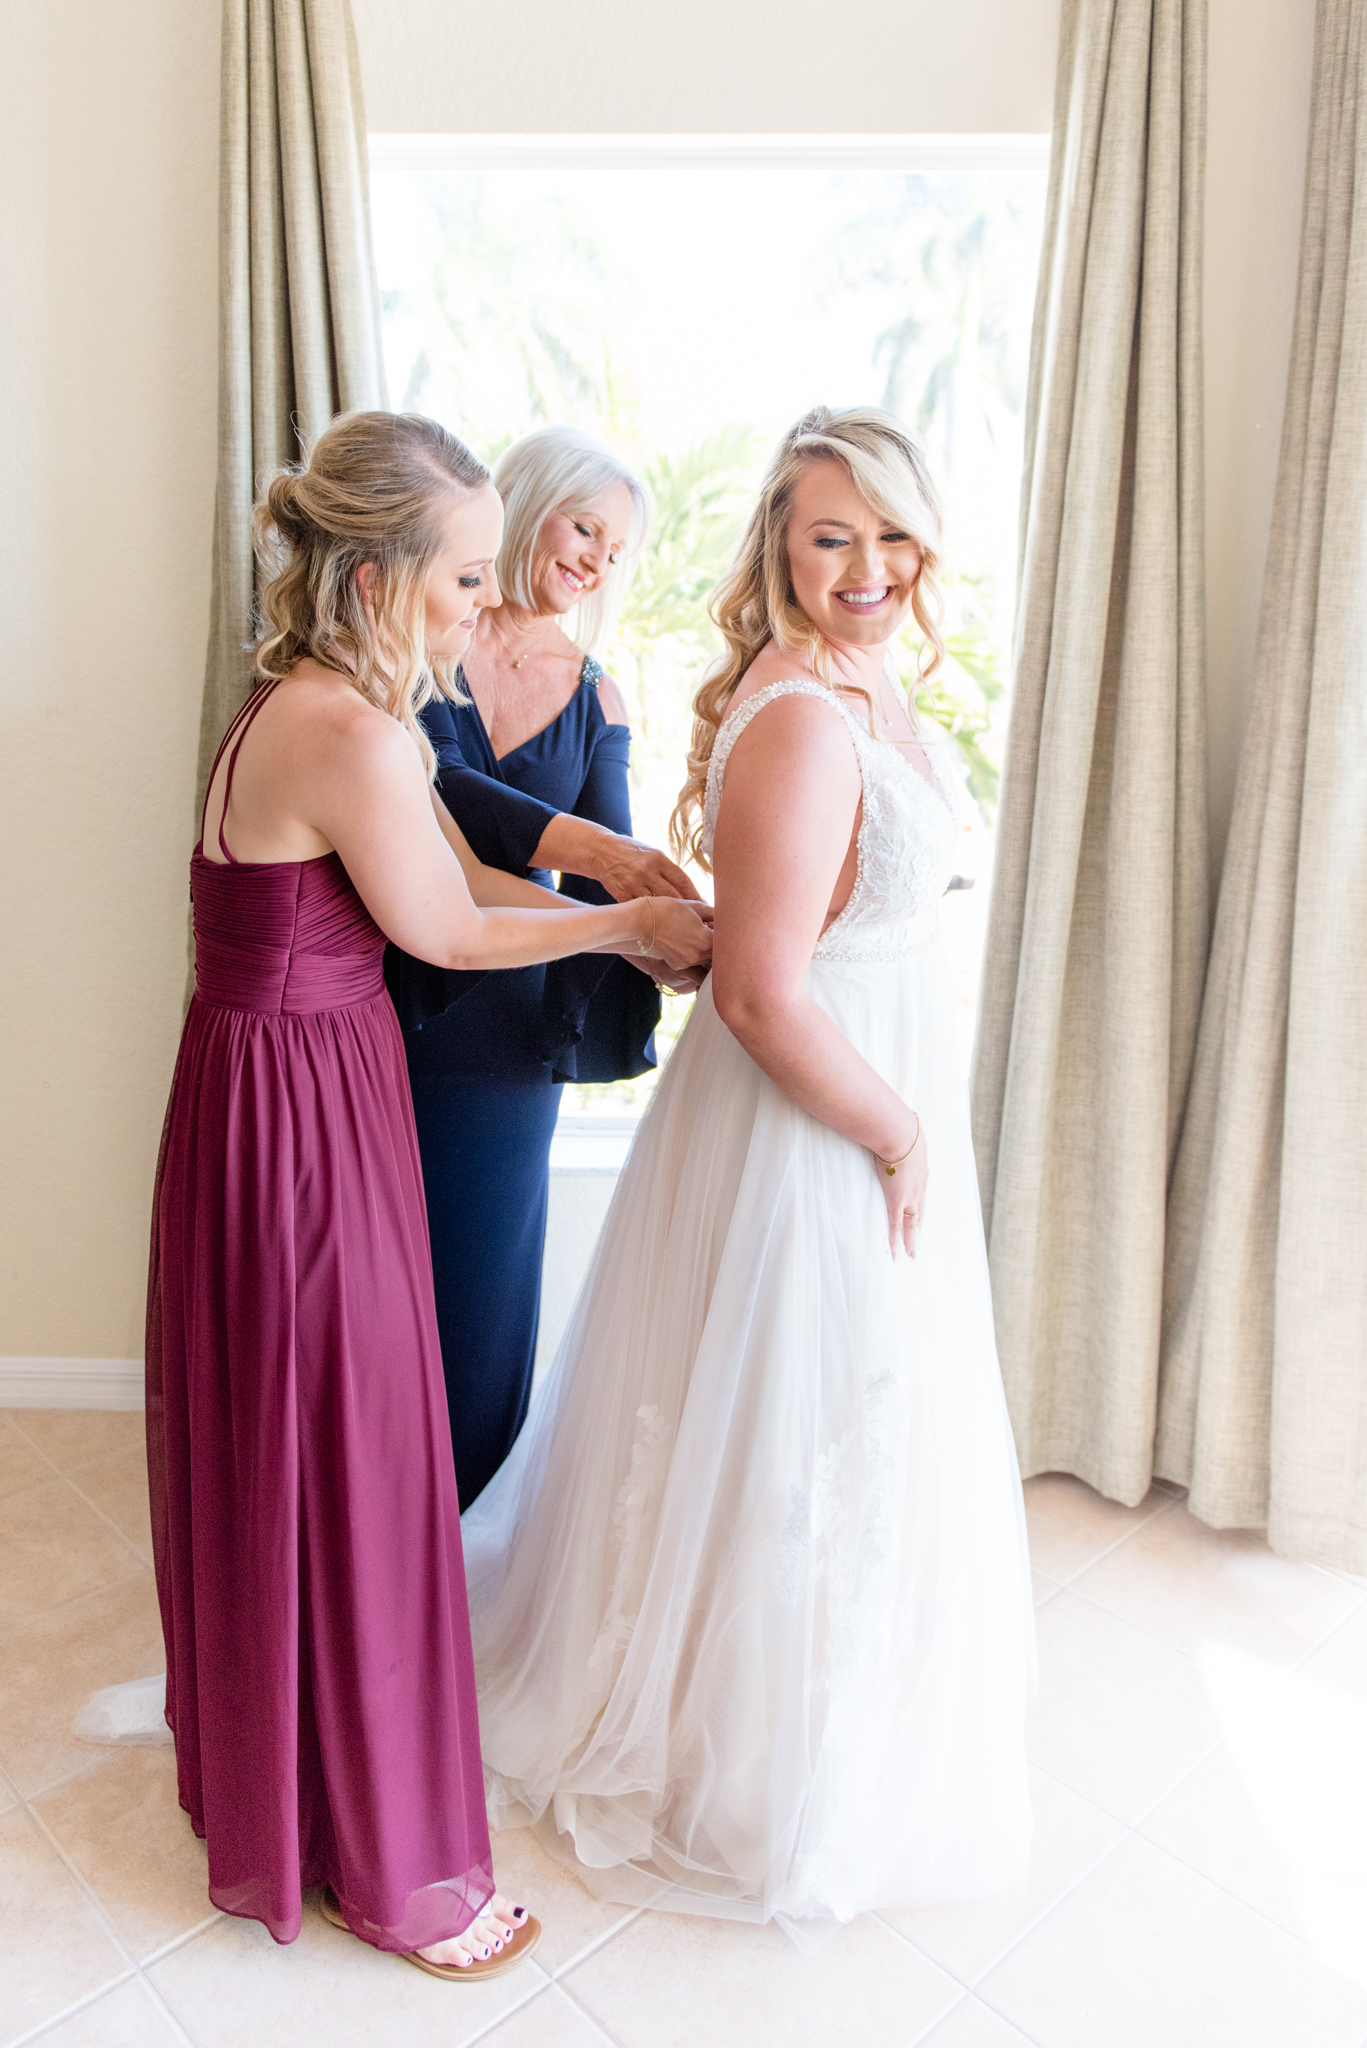 Bride's mother and sister help her get ready.